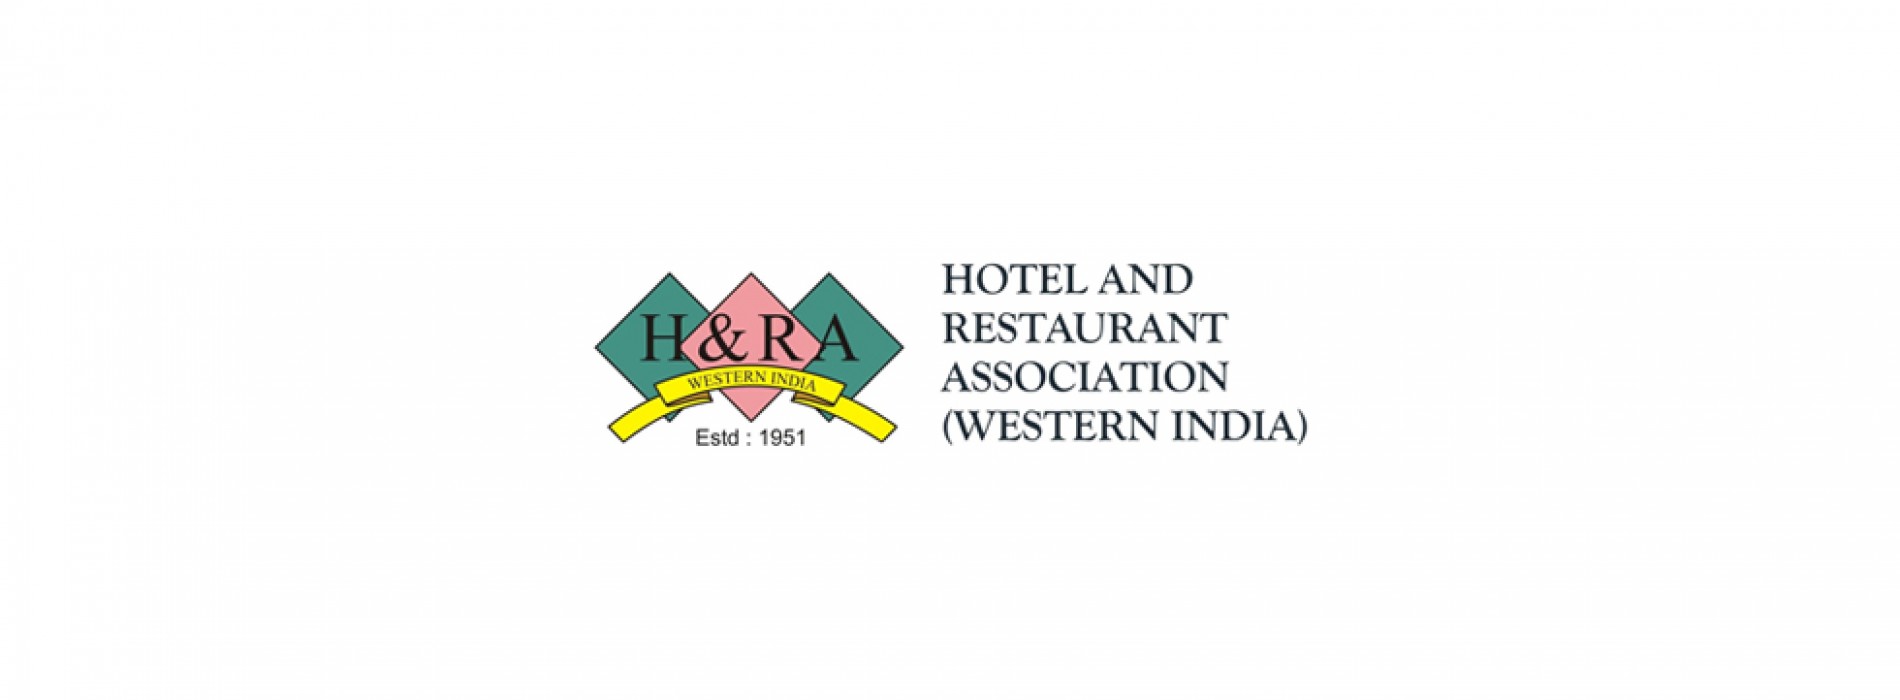 Significant drop in ARRs & declining FTAs are resulting in poor growth for hotels